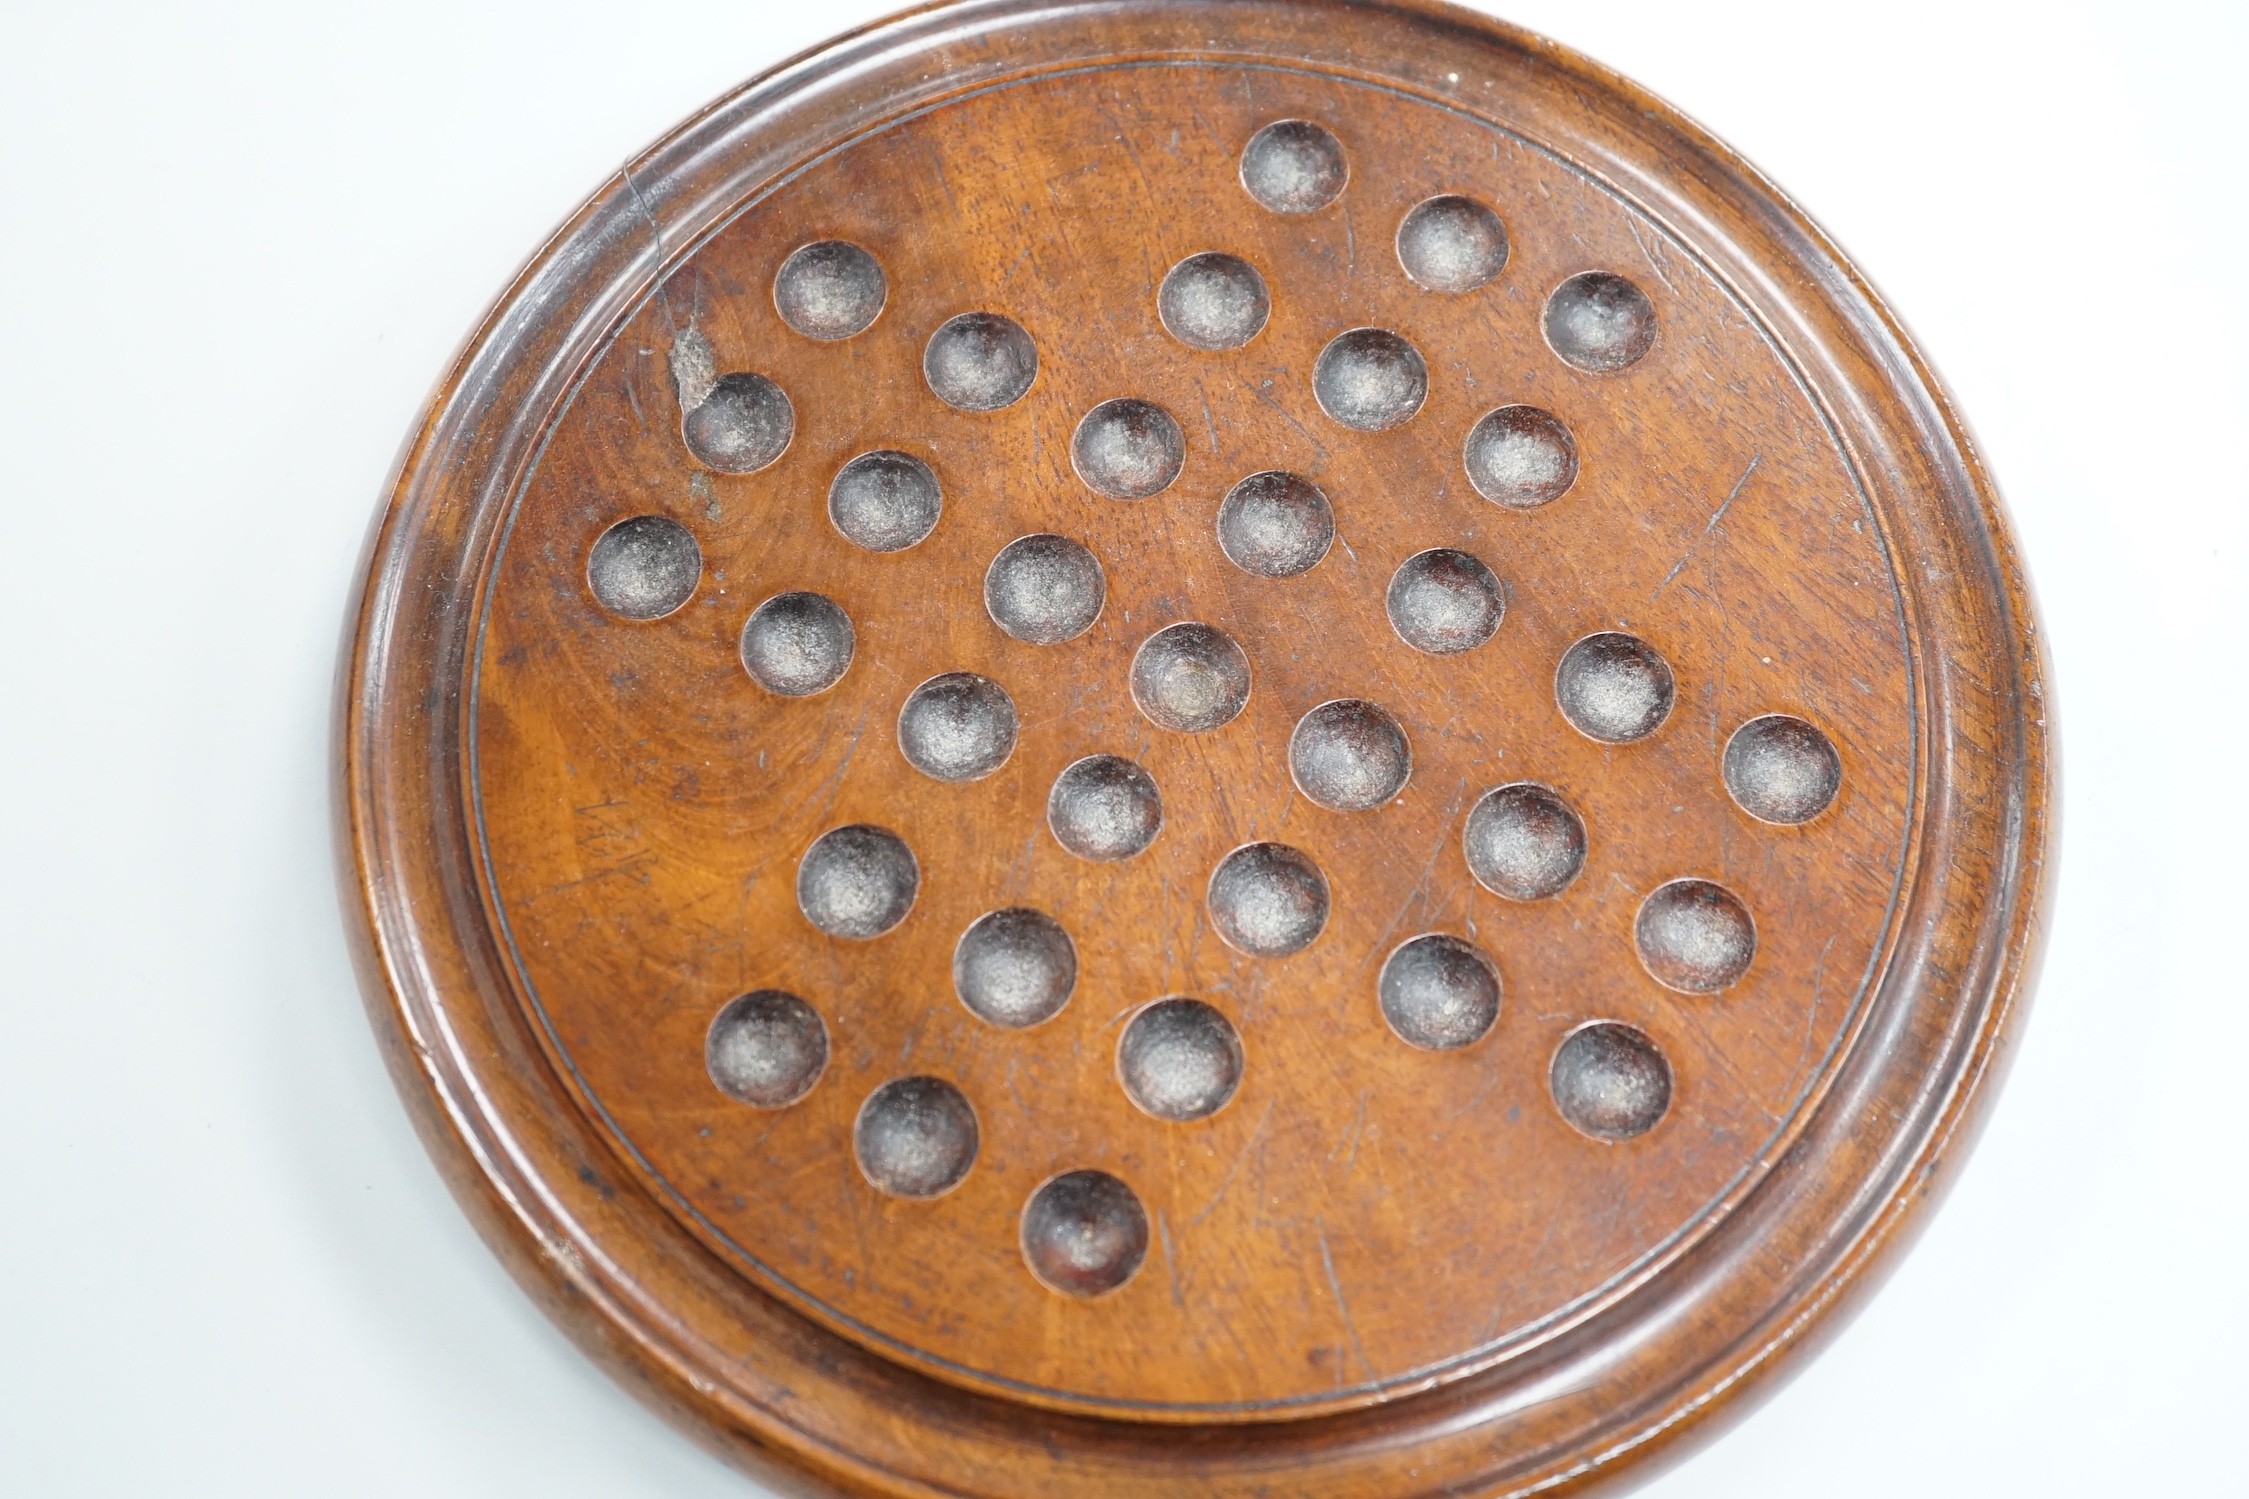 A mahogany solitaire board with a collection of latticino and marbled glass marbles